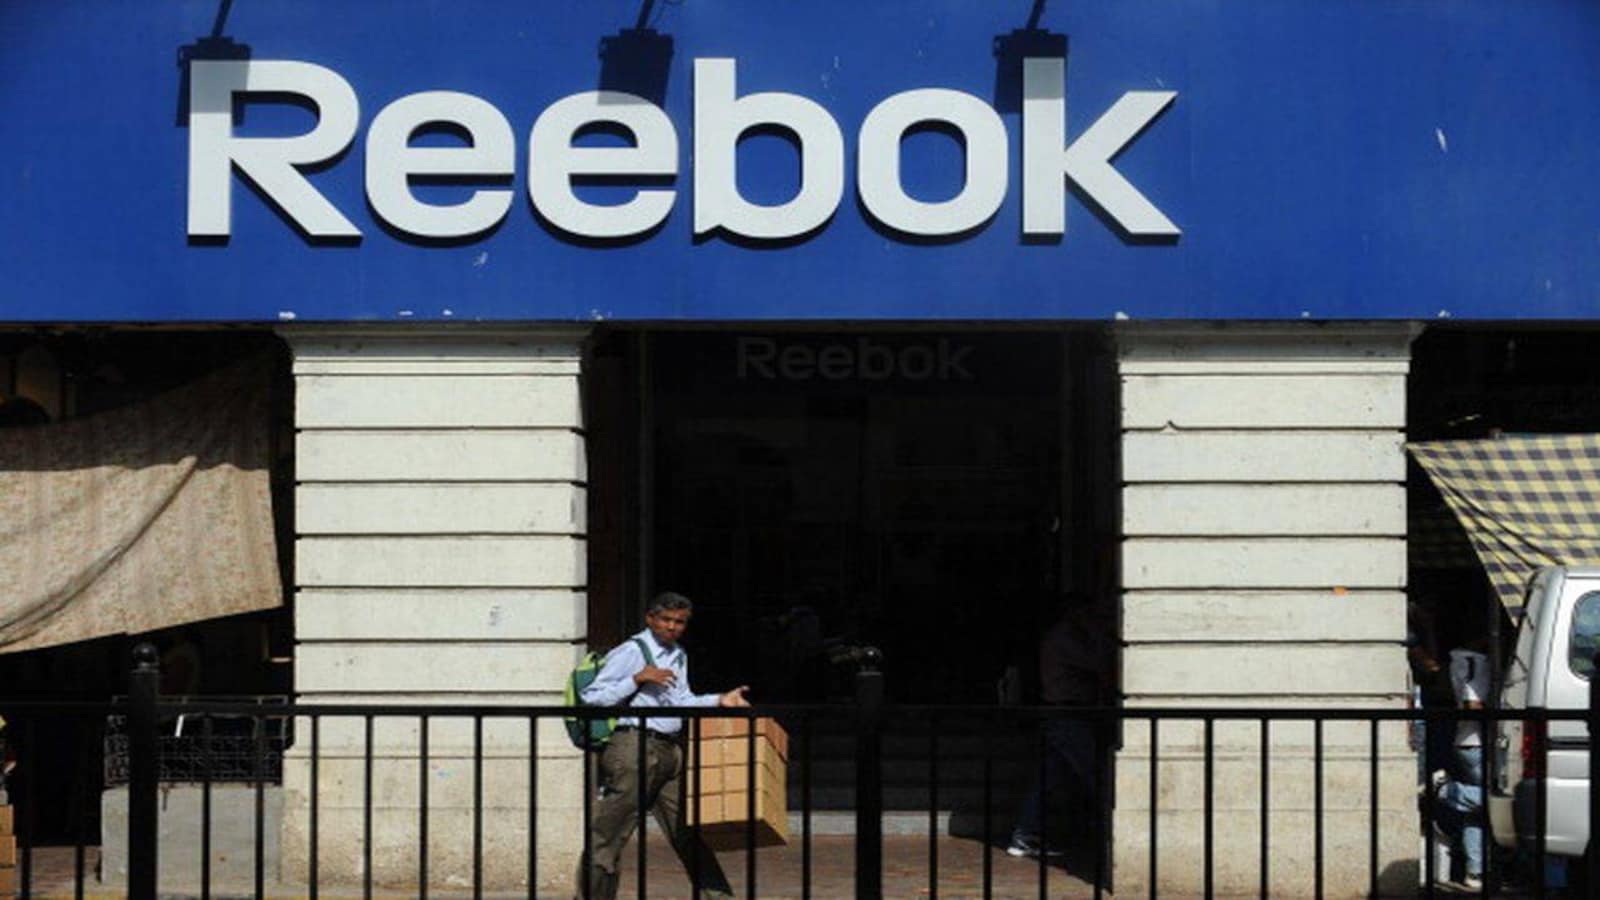 Reebok gets second shot at India growth with Aditya Birla, finally escaping  from Adidas shadow - Industry News